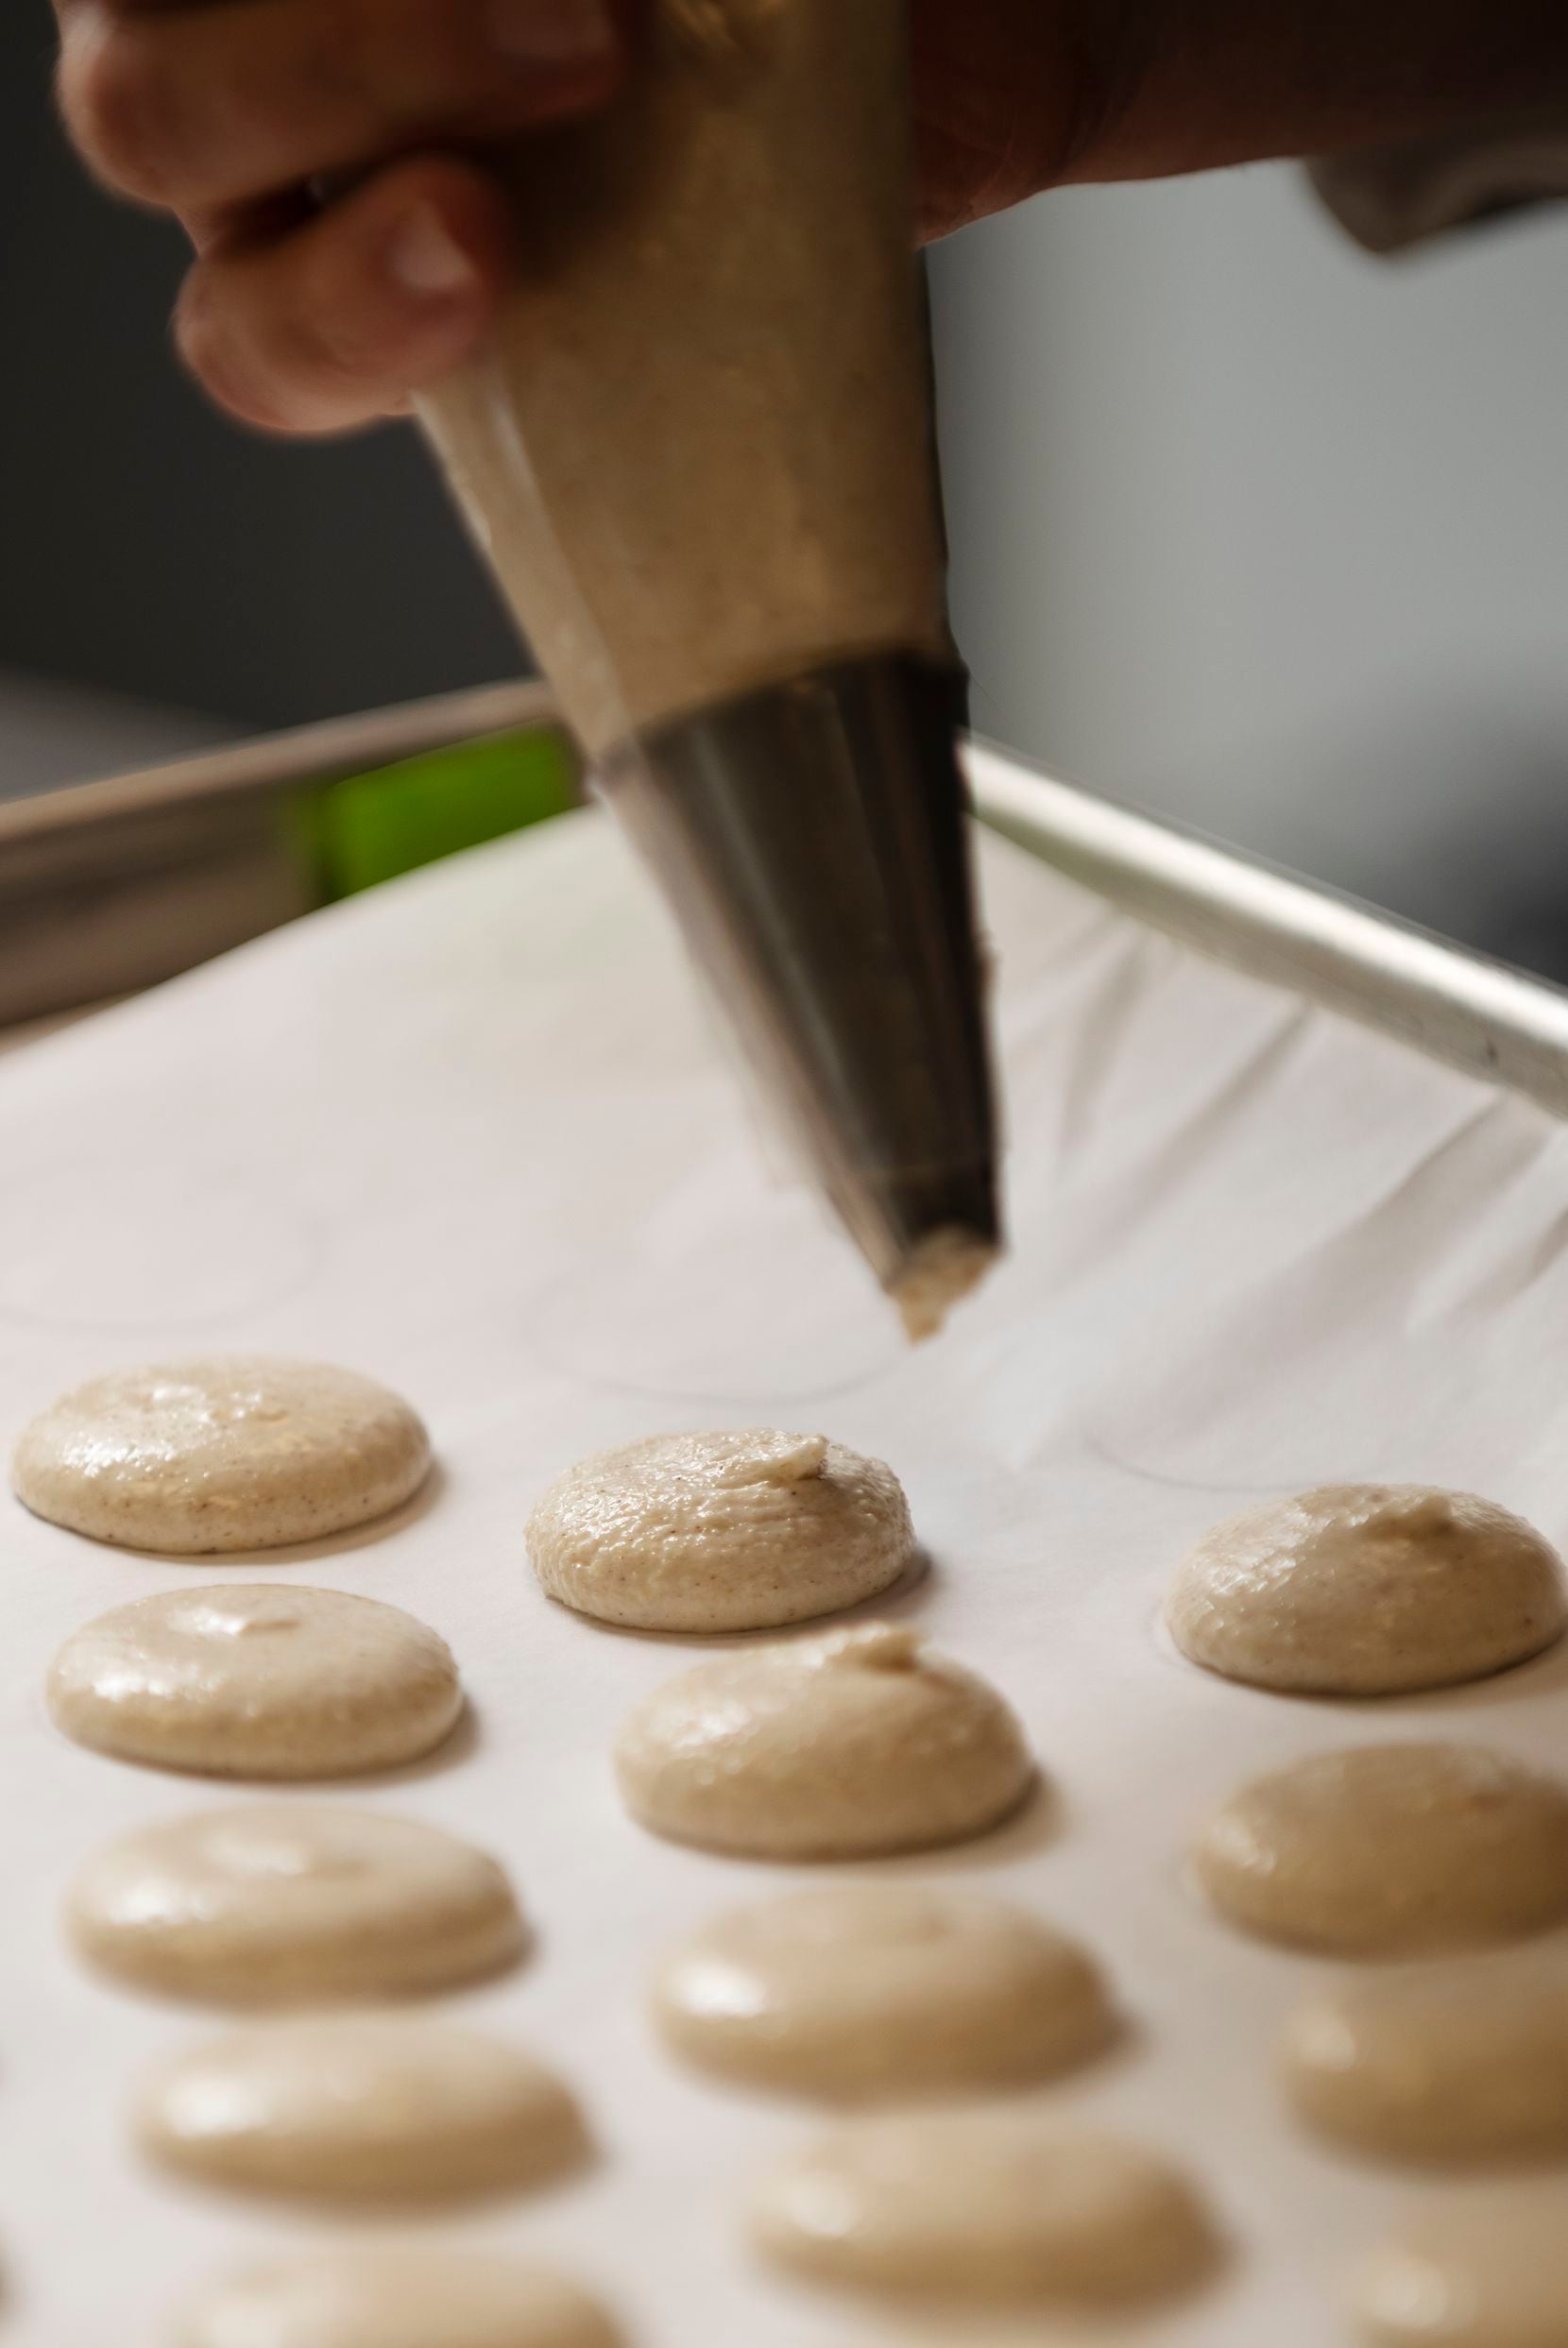 Andrea Meyer, of Bisous Bisous Patisserie, pipes macaron batter into small rounds on a baking sheet. 